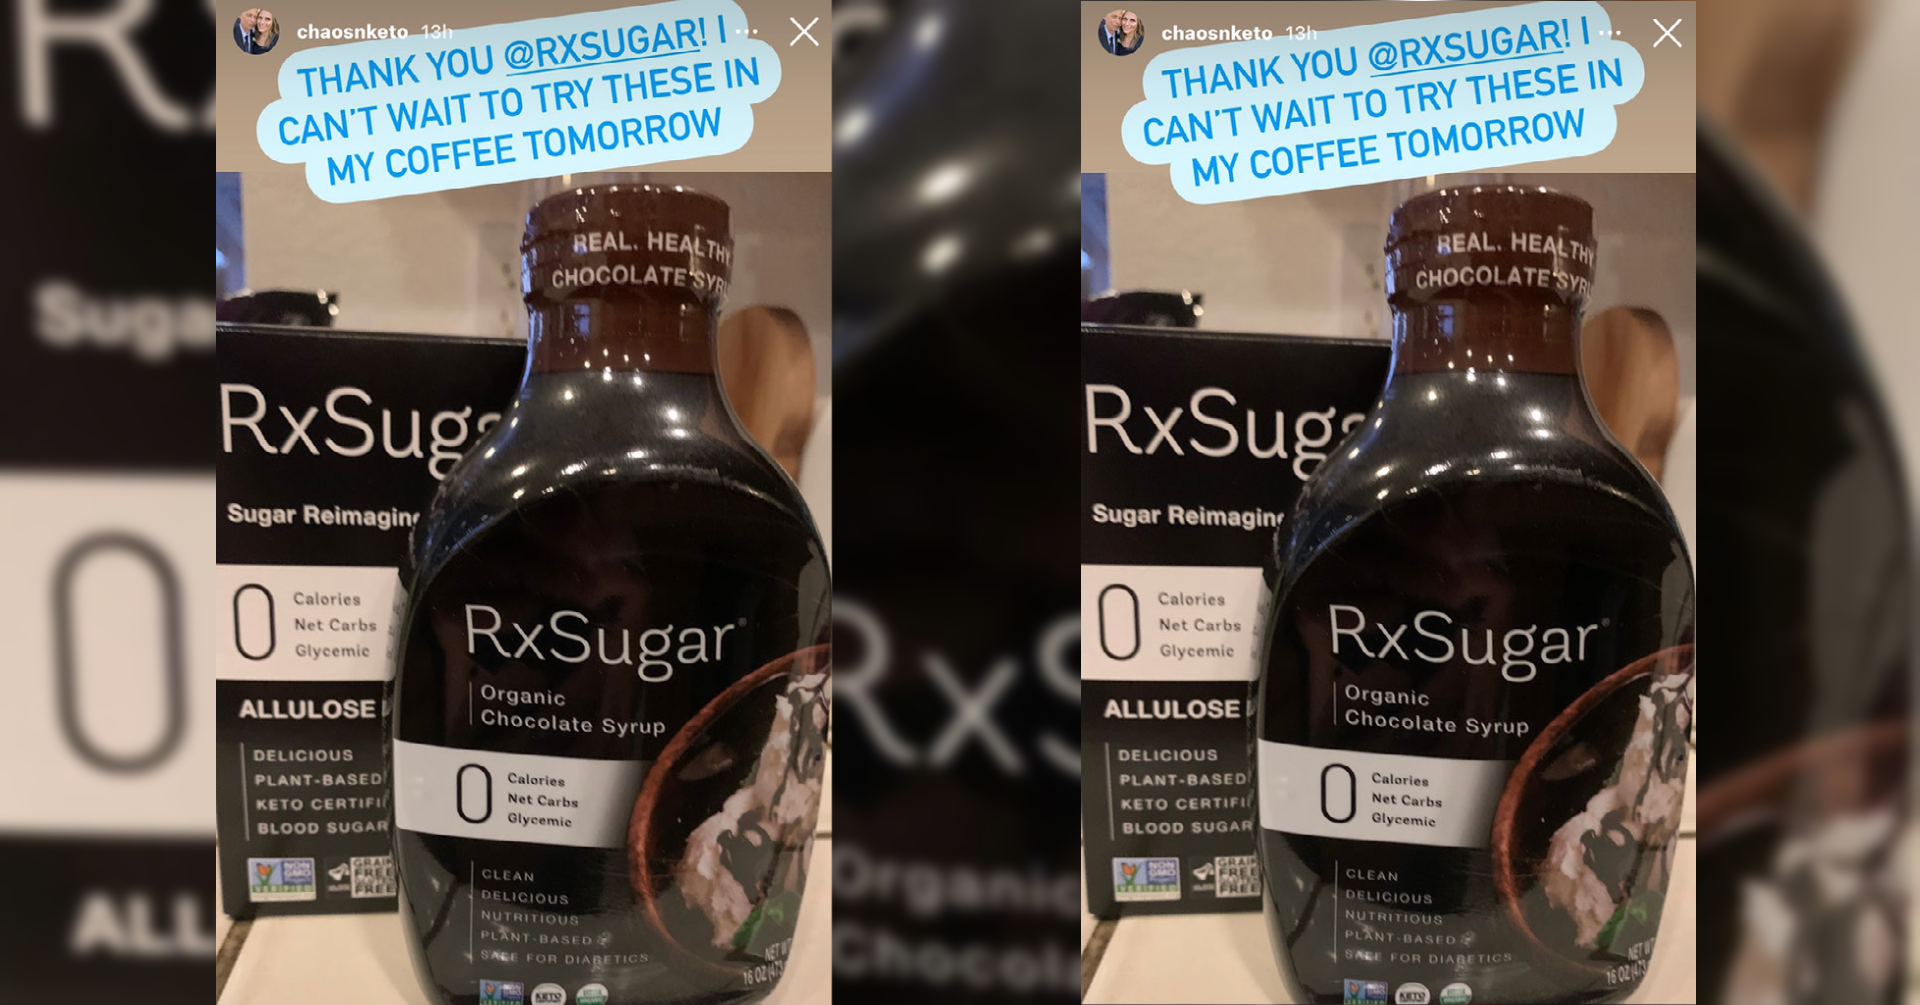 Chaosnketo Receiving Her RxSugar Package